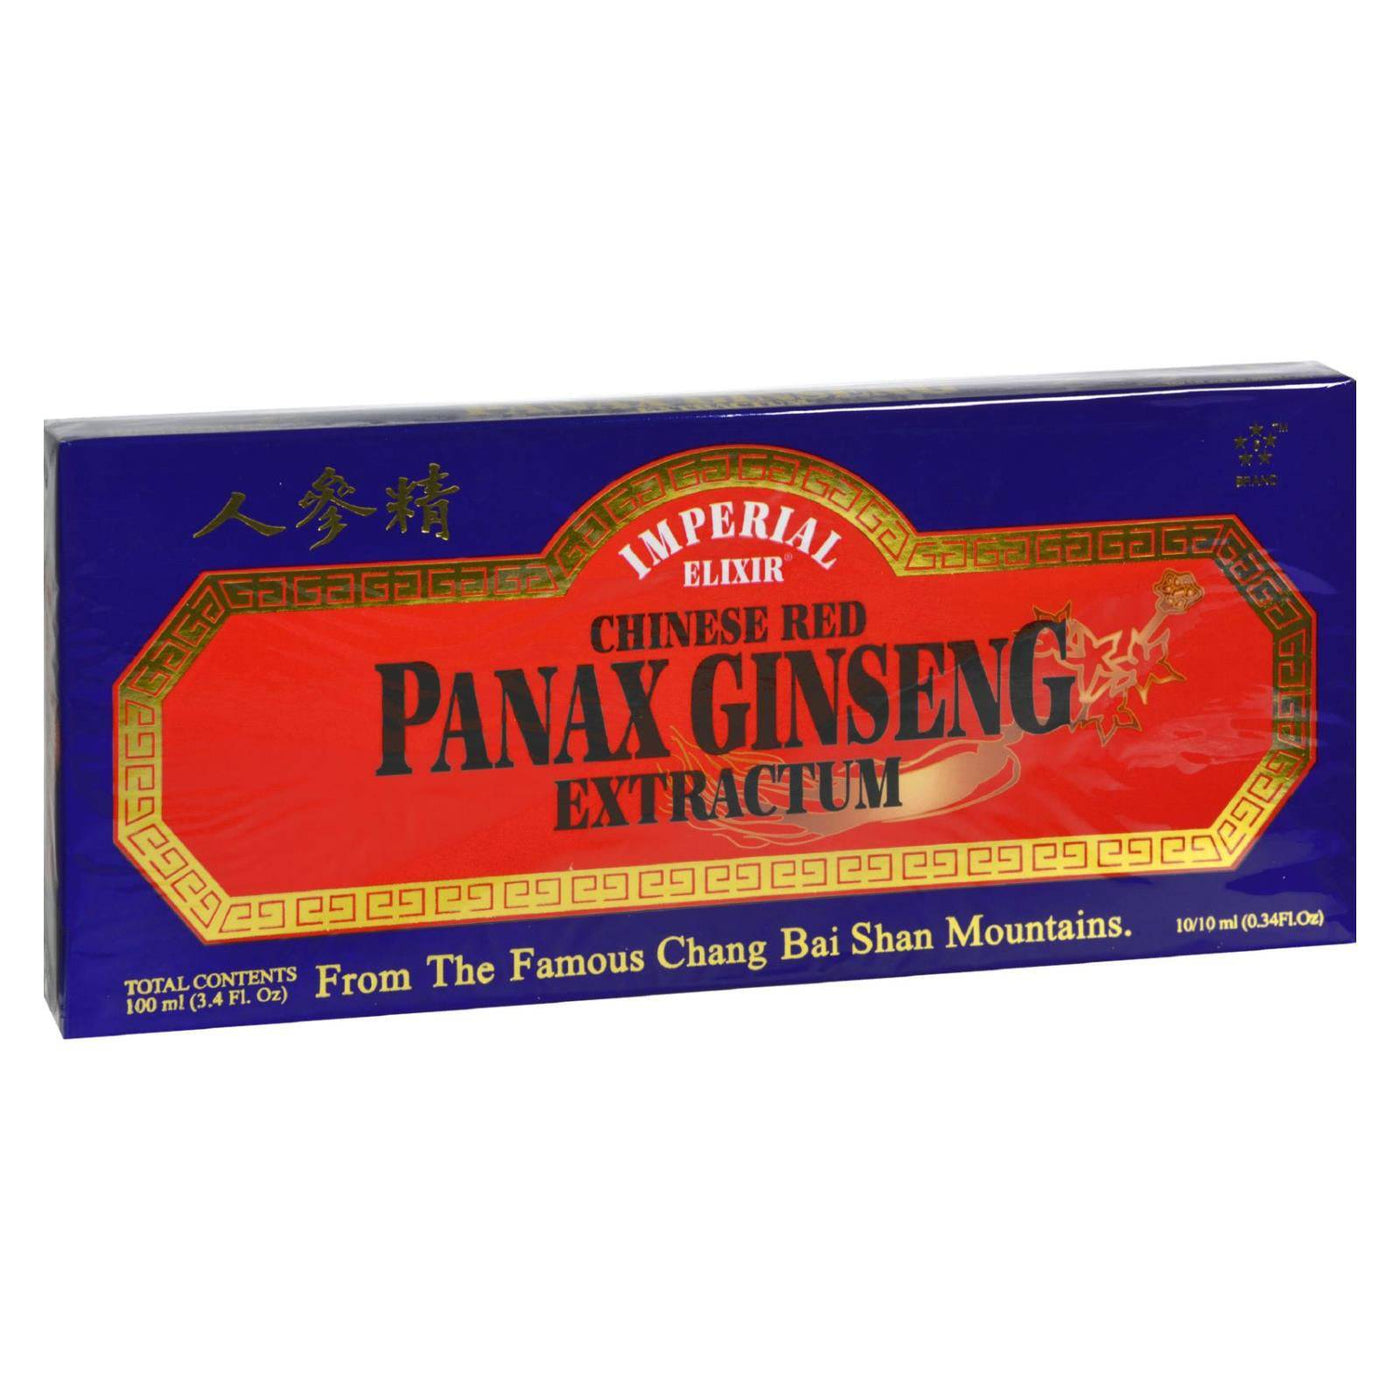 Imperial Elixir Chinese Red Panax Ginseng Extractum - 10 Bottles - 10 Ml Each | OnlyNaturals.us